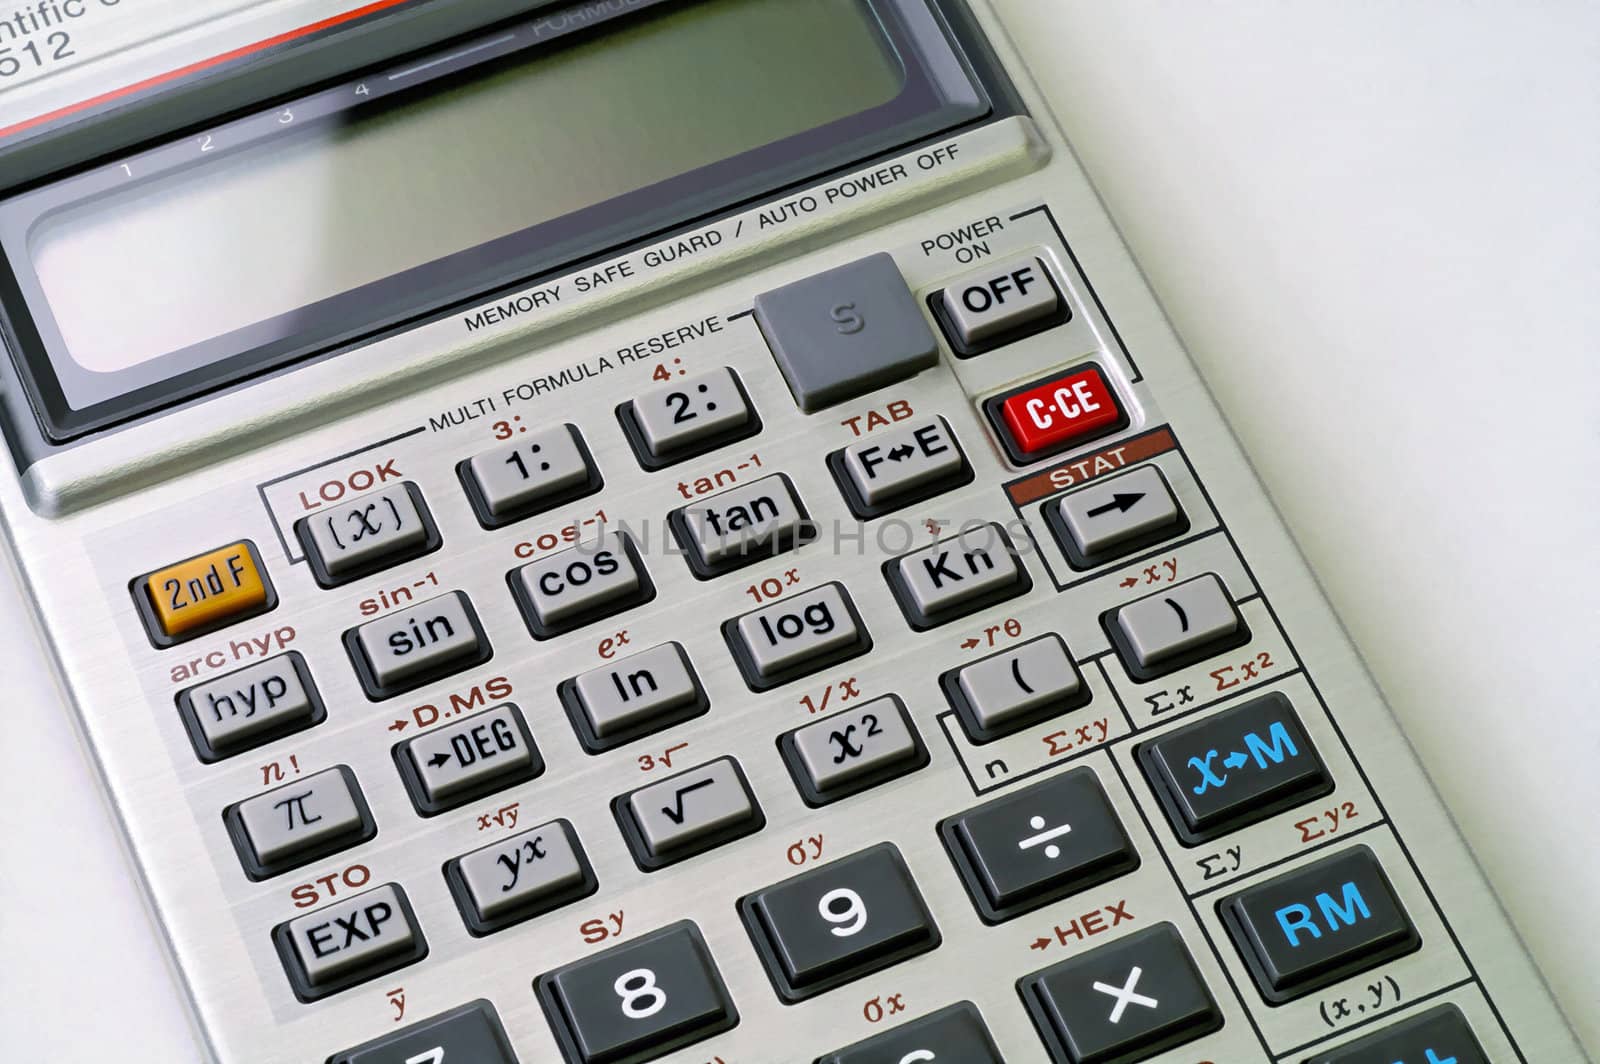 Scientific calculator with trigonometric, exponential, coordinates conversion (cartesian / polar) , and other keys visible.